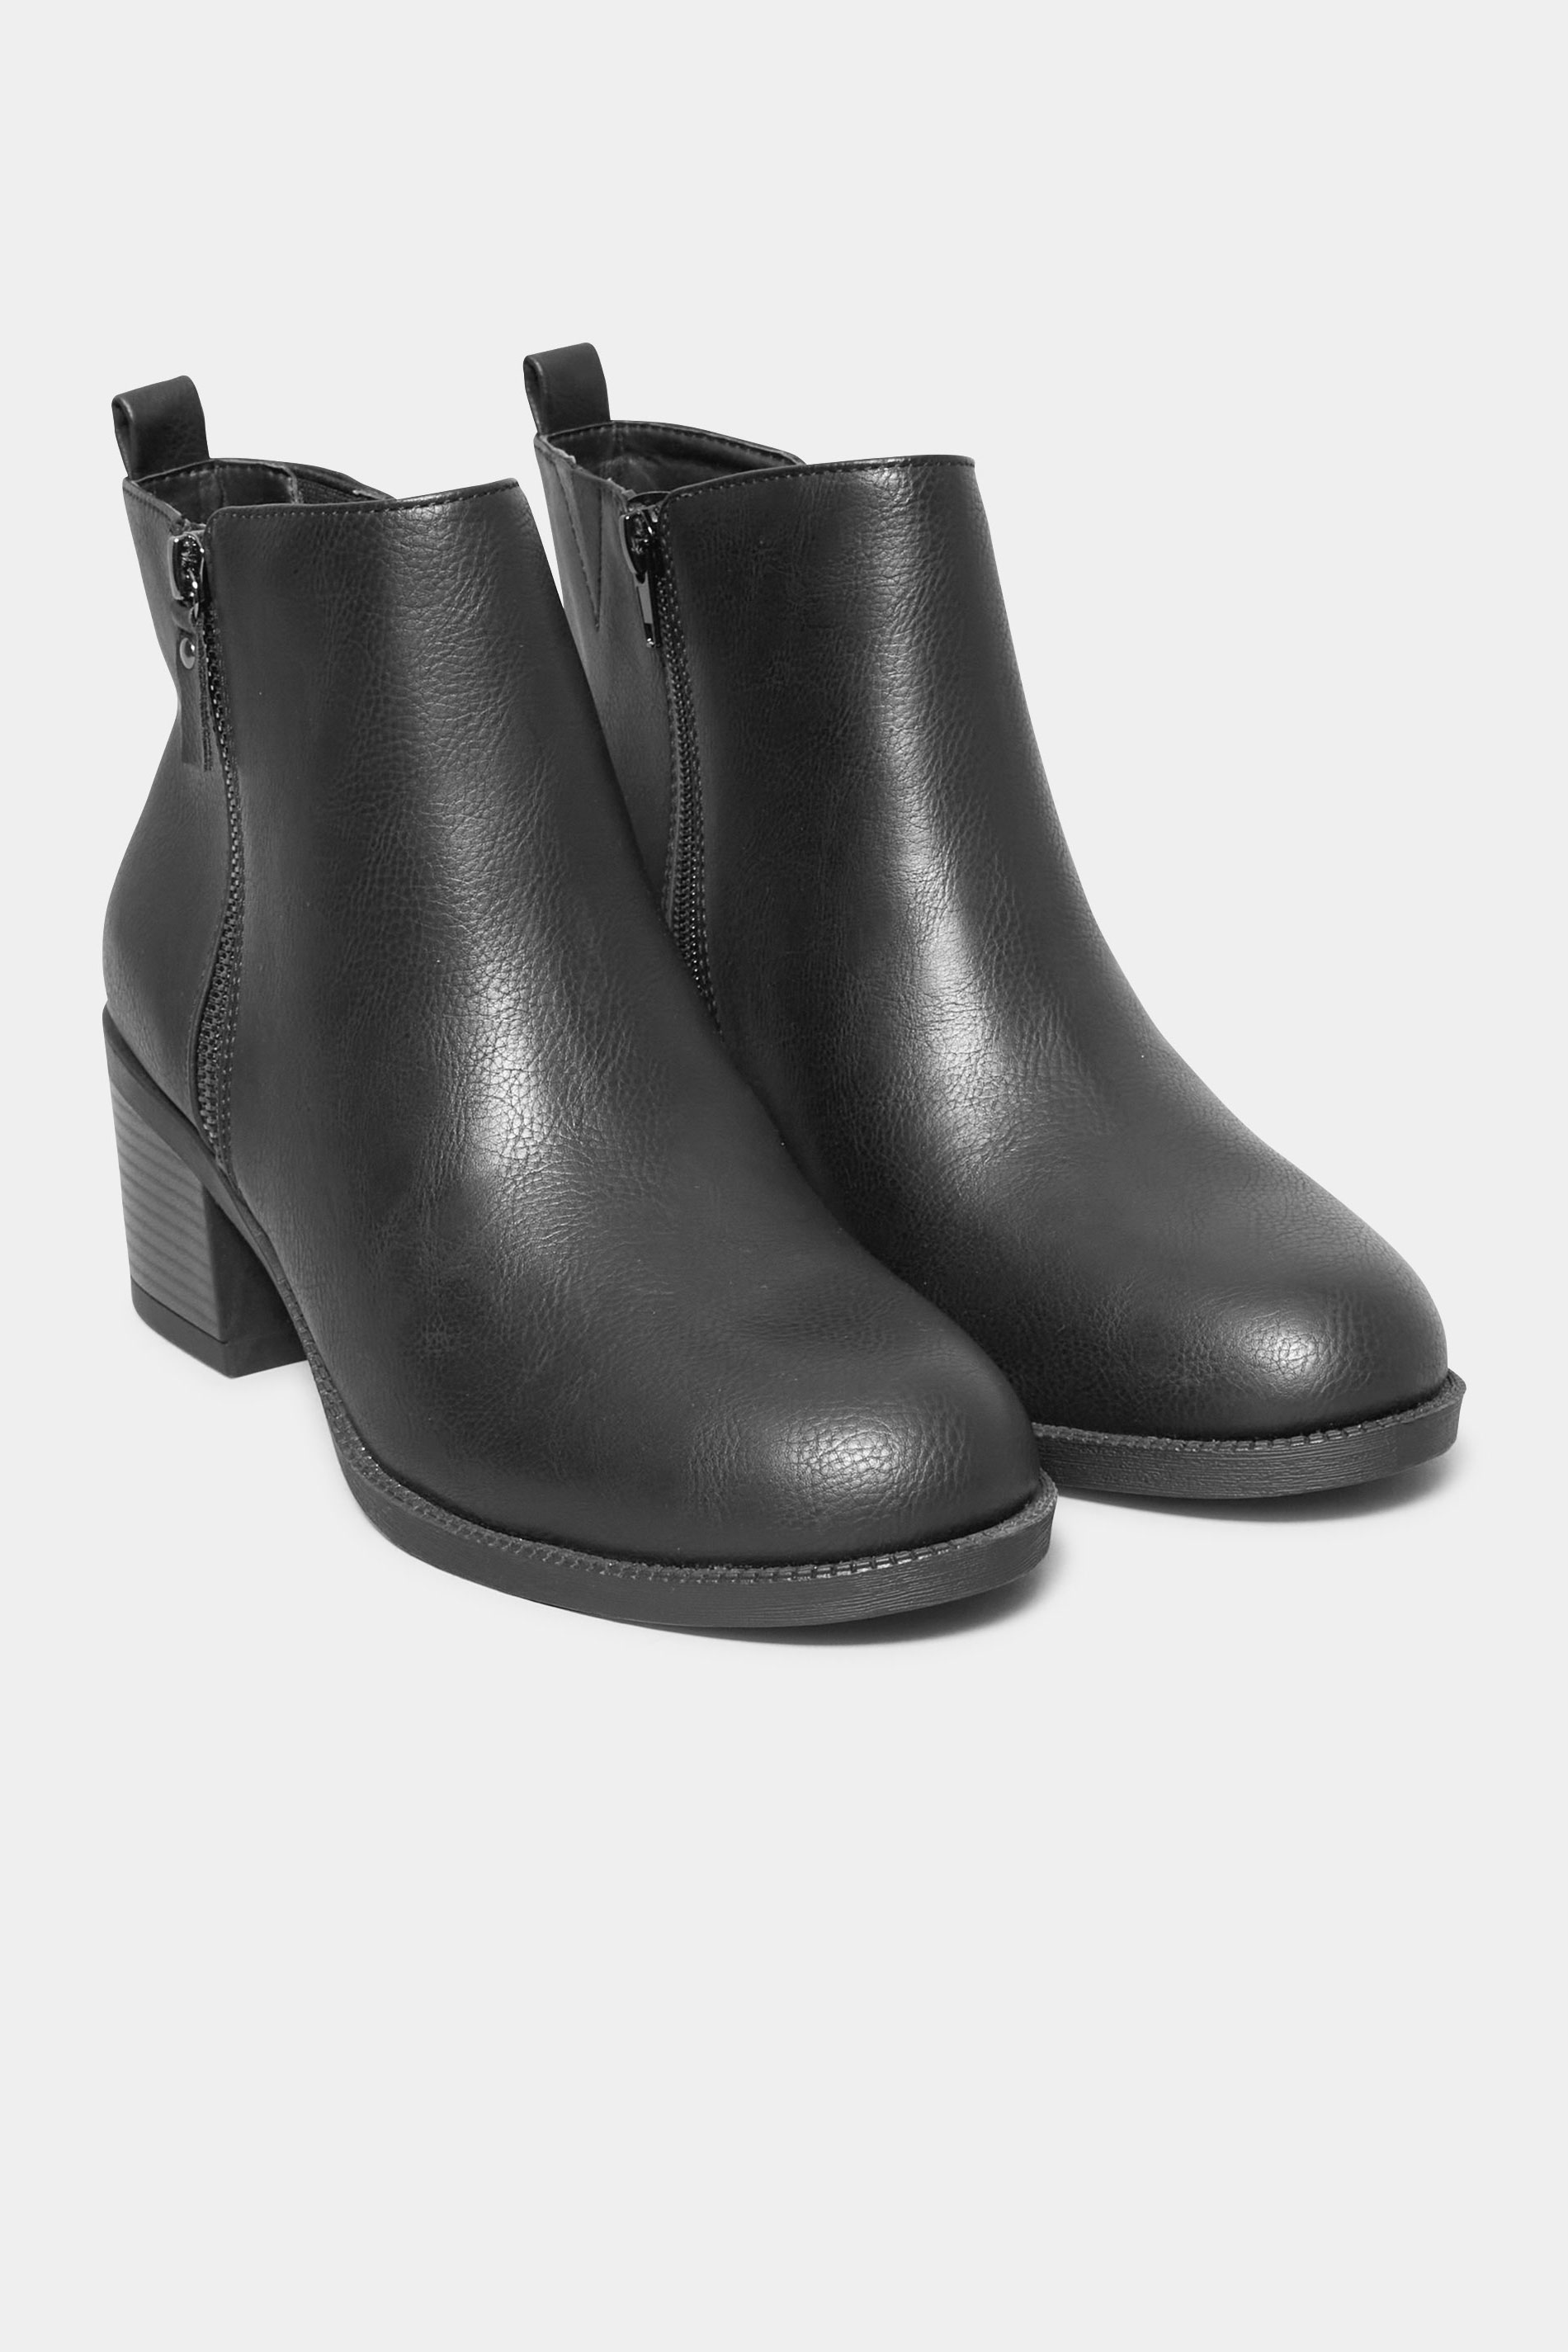 Black Side Zip Block Heel Boots In Wide E Fit & Extra Wide EEE Fit | Yours Clothing 2